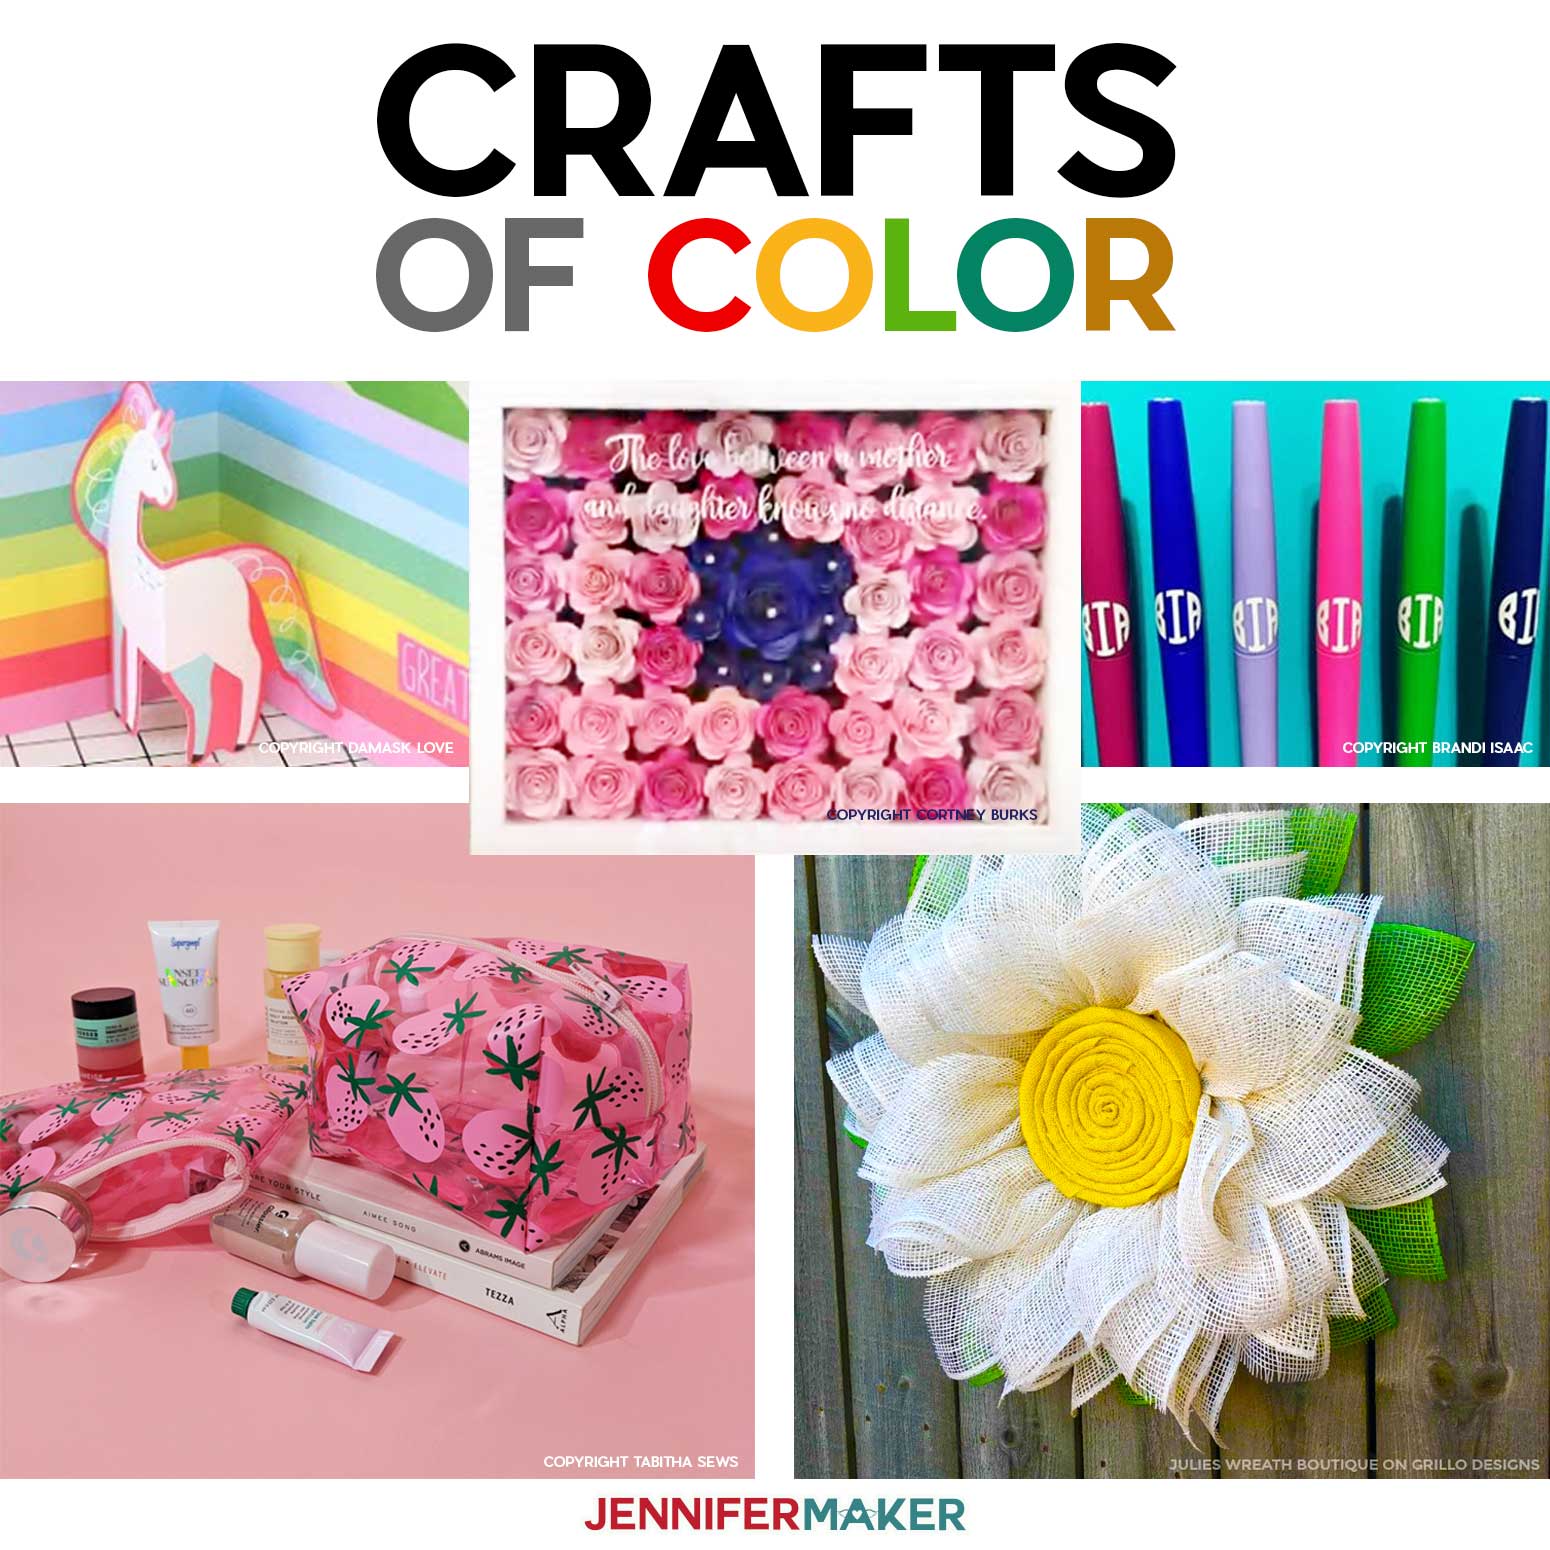 Crafts of Color: Black Crafters Who Inspire & Educate!